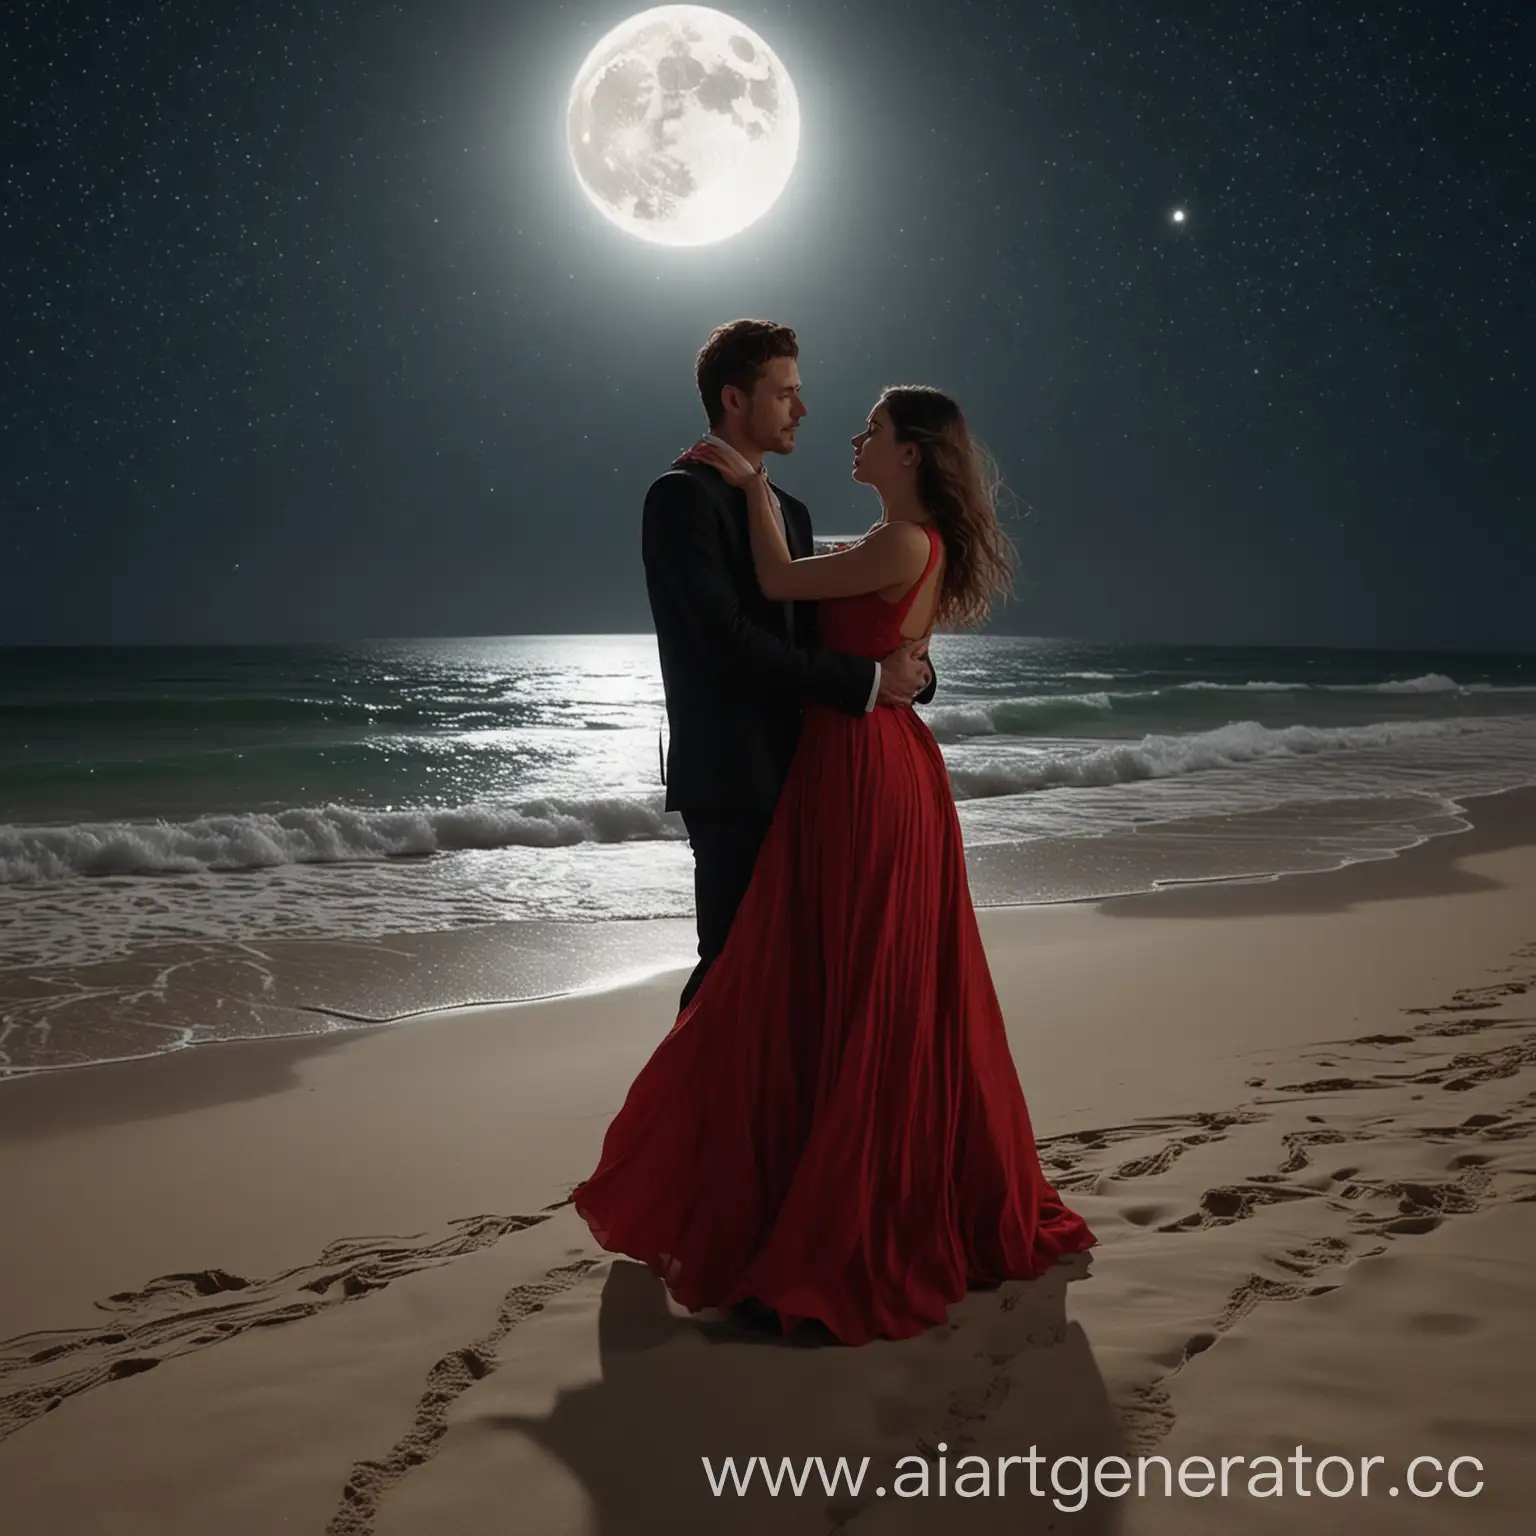 starry night, moon, sandy beach, a girl in a red long dress dancing with a guy, a guy in a black suit 4k.